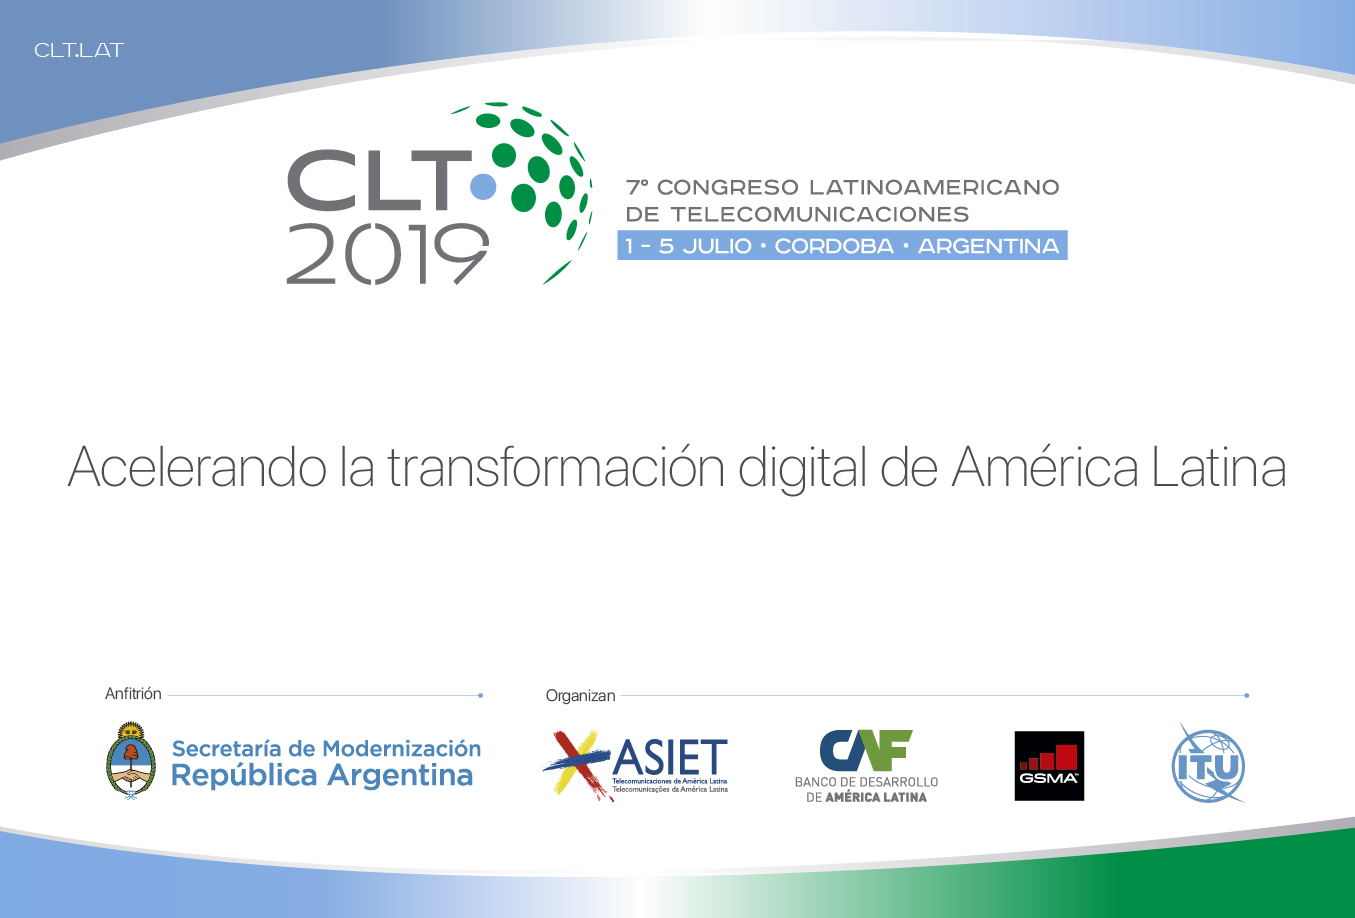 CLT19 will chart the path to digital transformation in Latin America with more than 20 activities